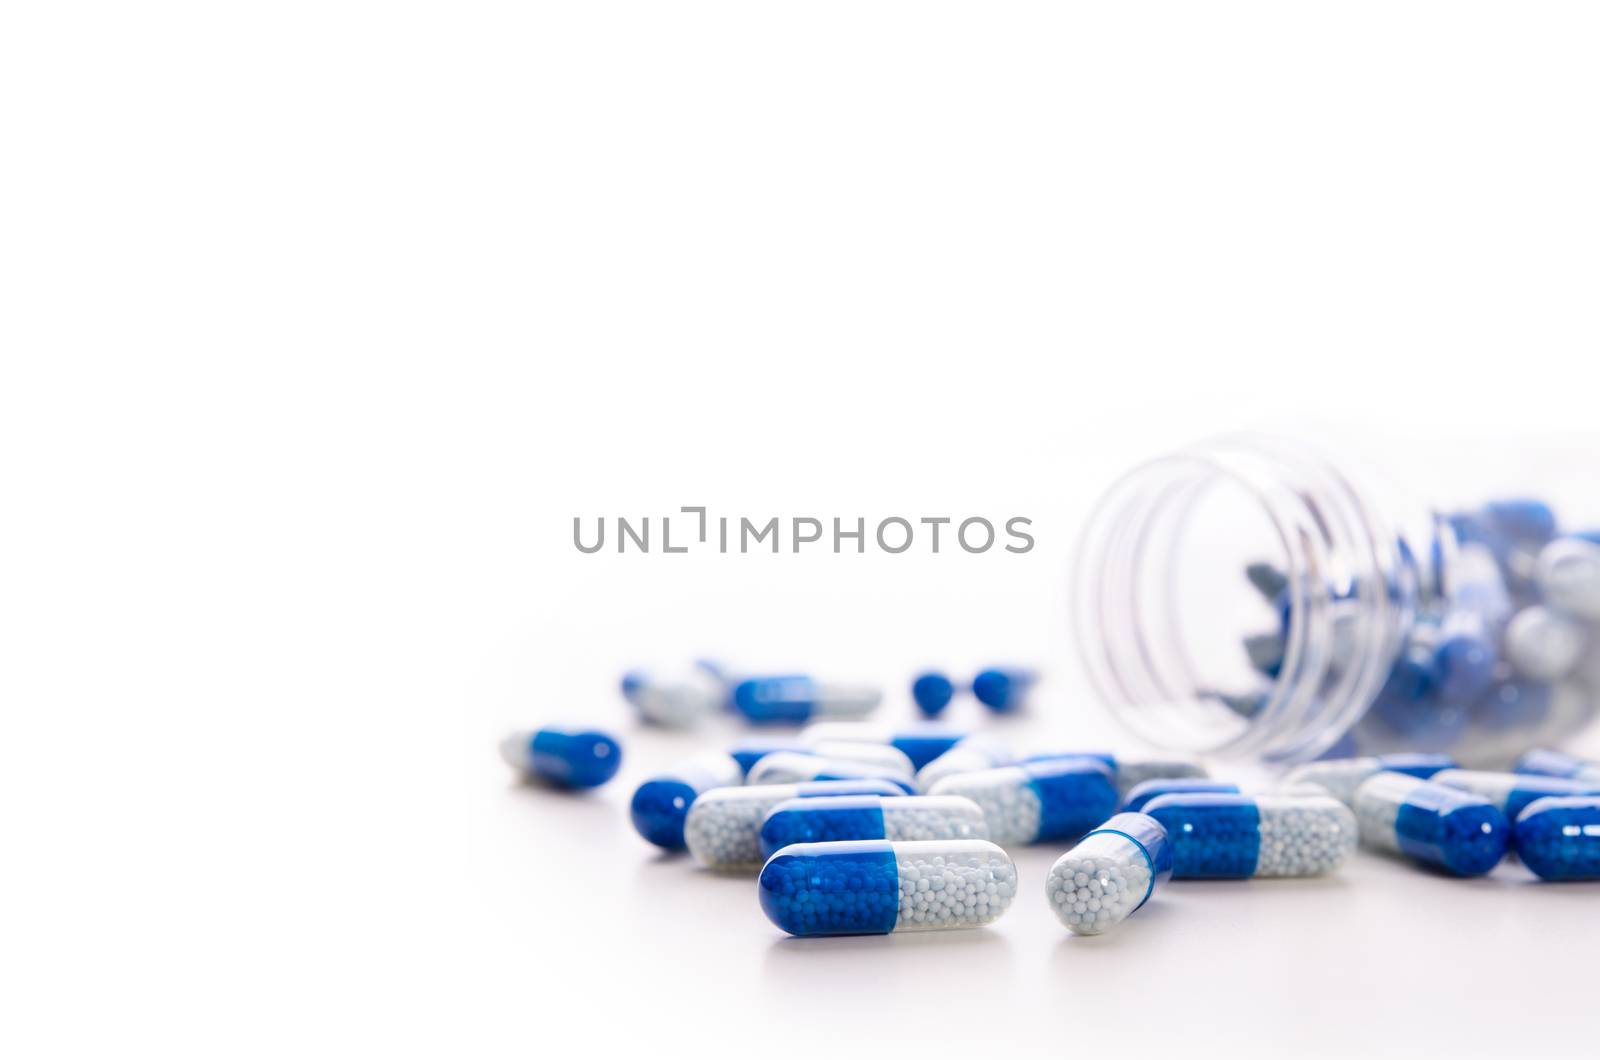 Pile of scattered capsules on a white background. capsules isolated white capsule pharmacy bottle pill drug concept